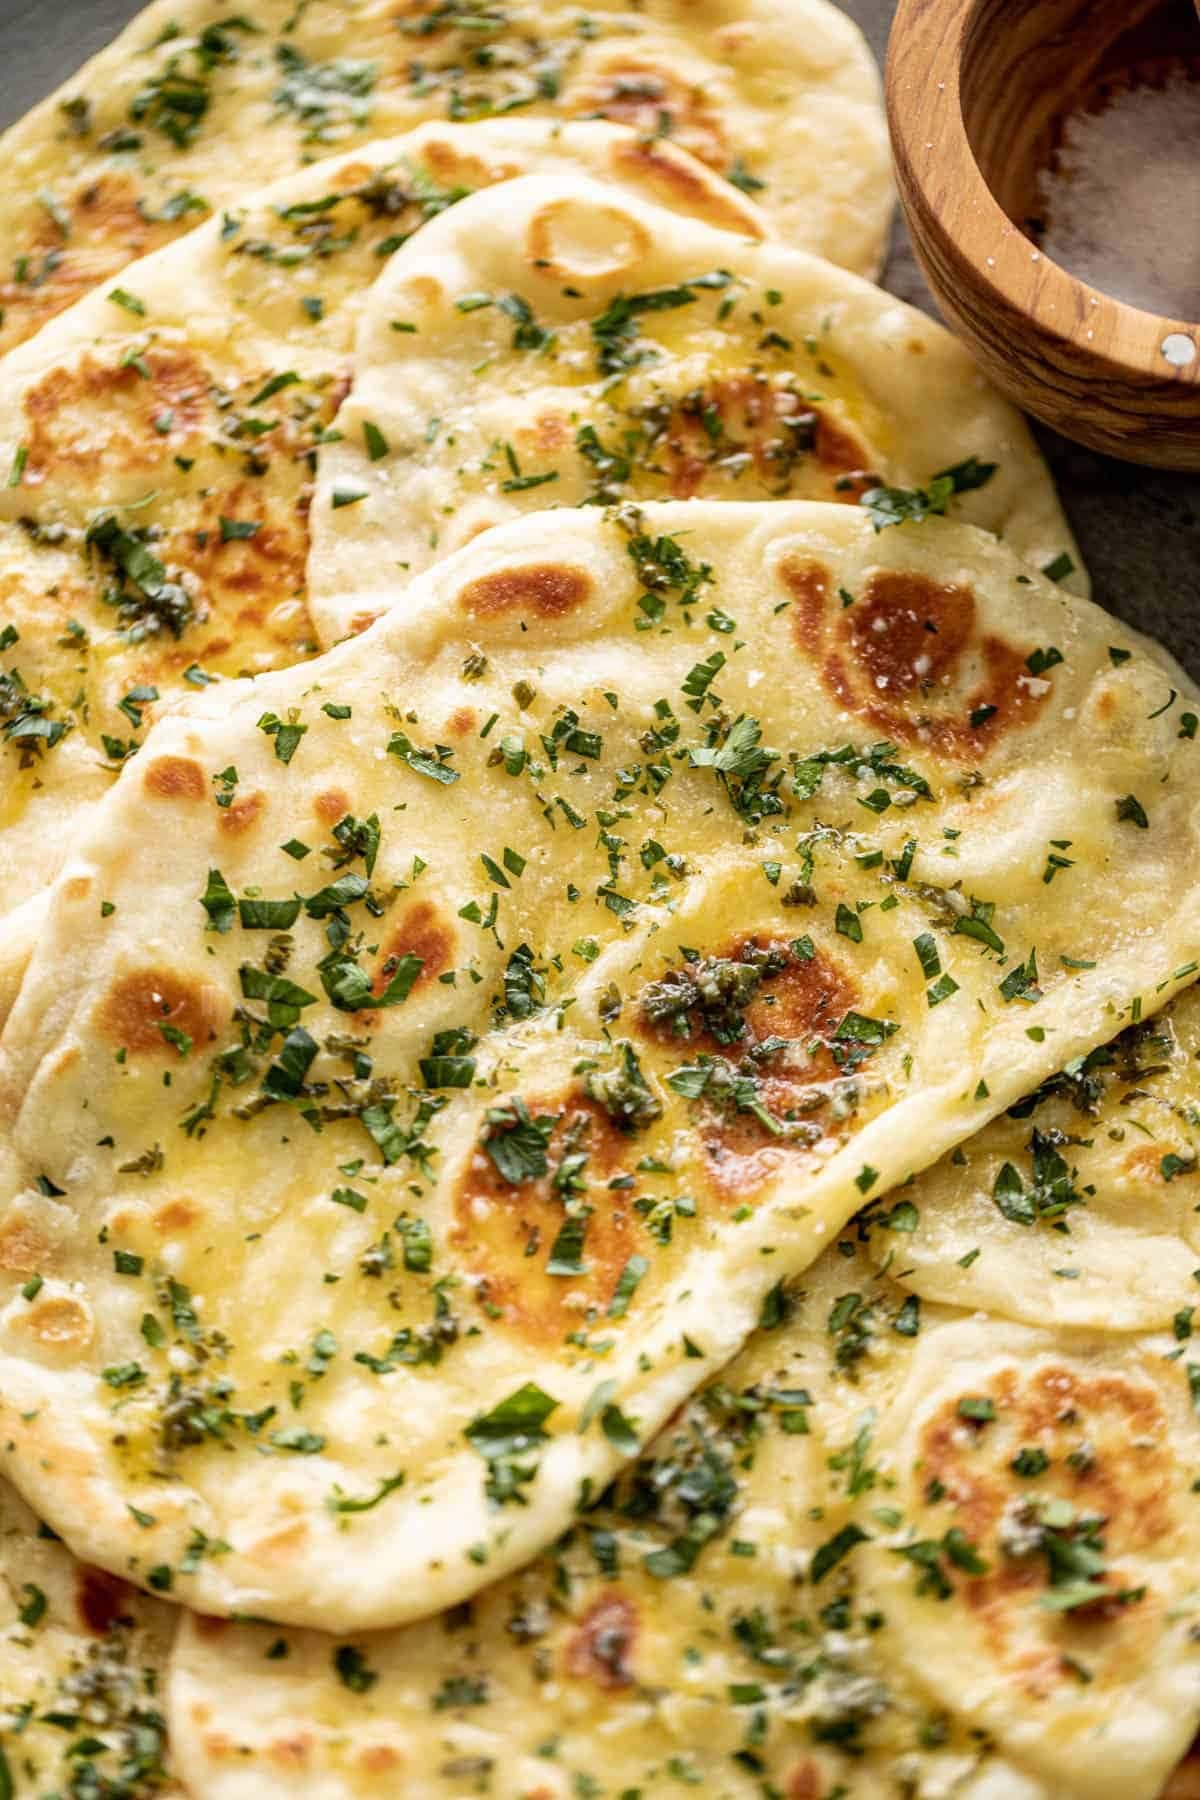 Garlic naan bead with garlic butter spread on top sprinkled with chopped herbs. 